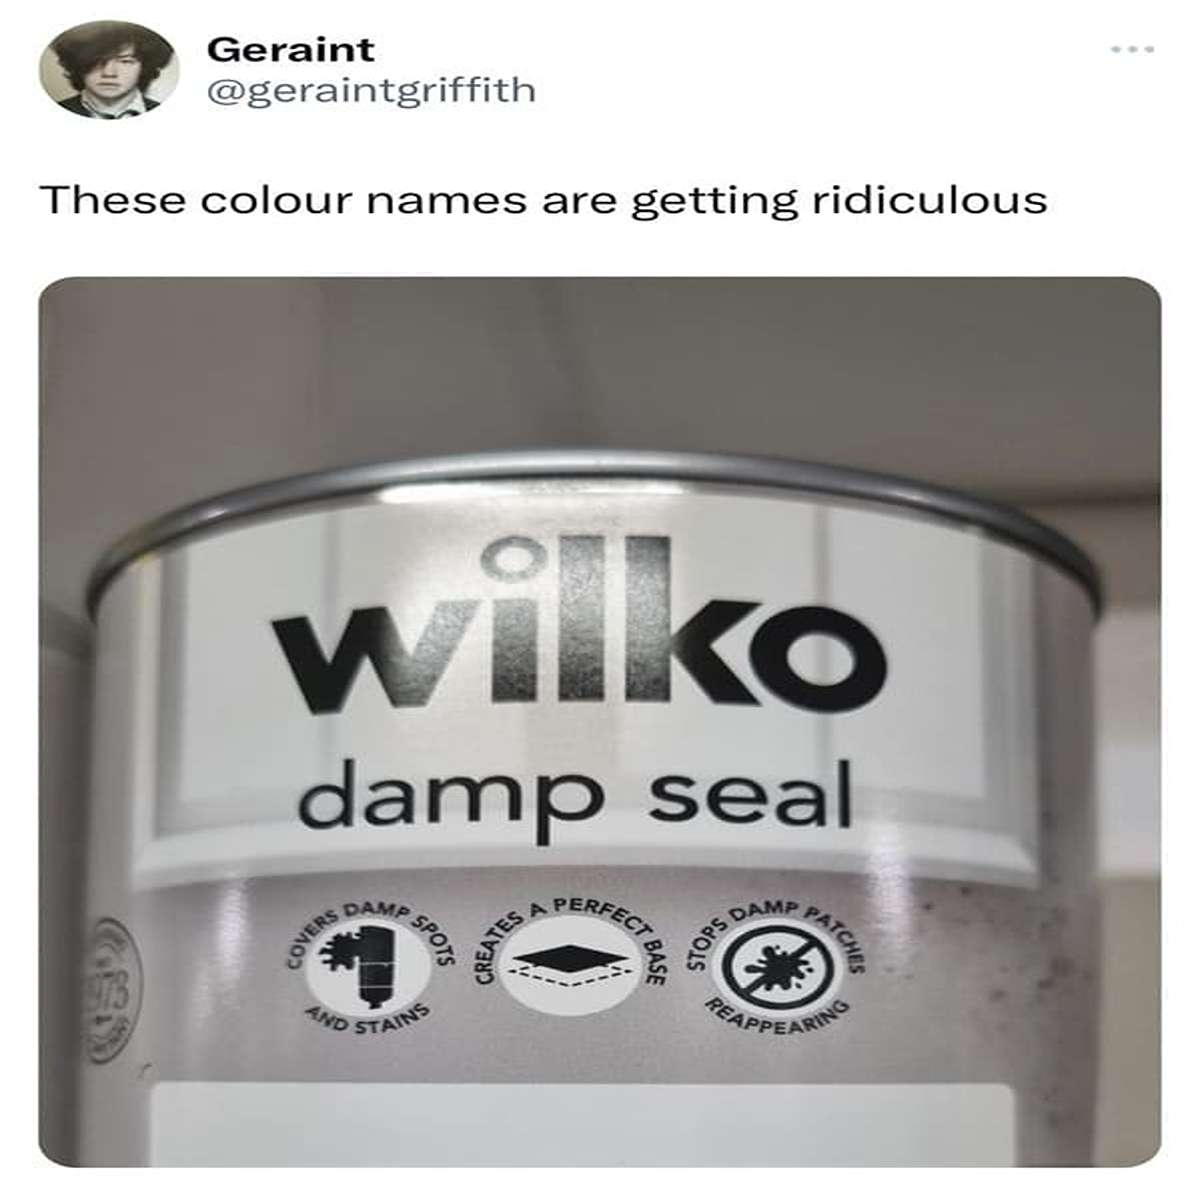 funny tweets and memes - Geraint 1973 These colour names are getting ridiculous wilko damp seal Covers And Mp Spots Stains Creates A Perfect Stops Da Patches Reappearing